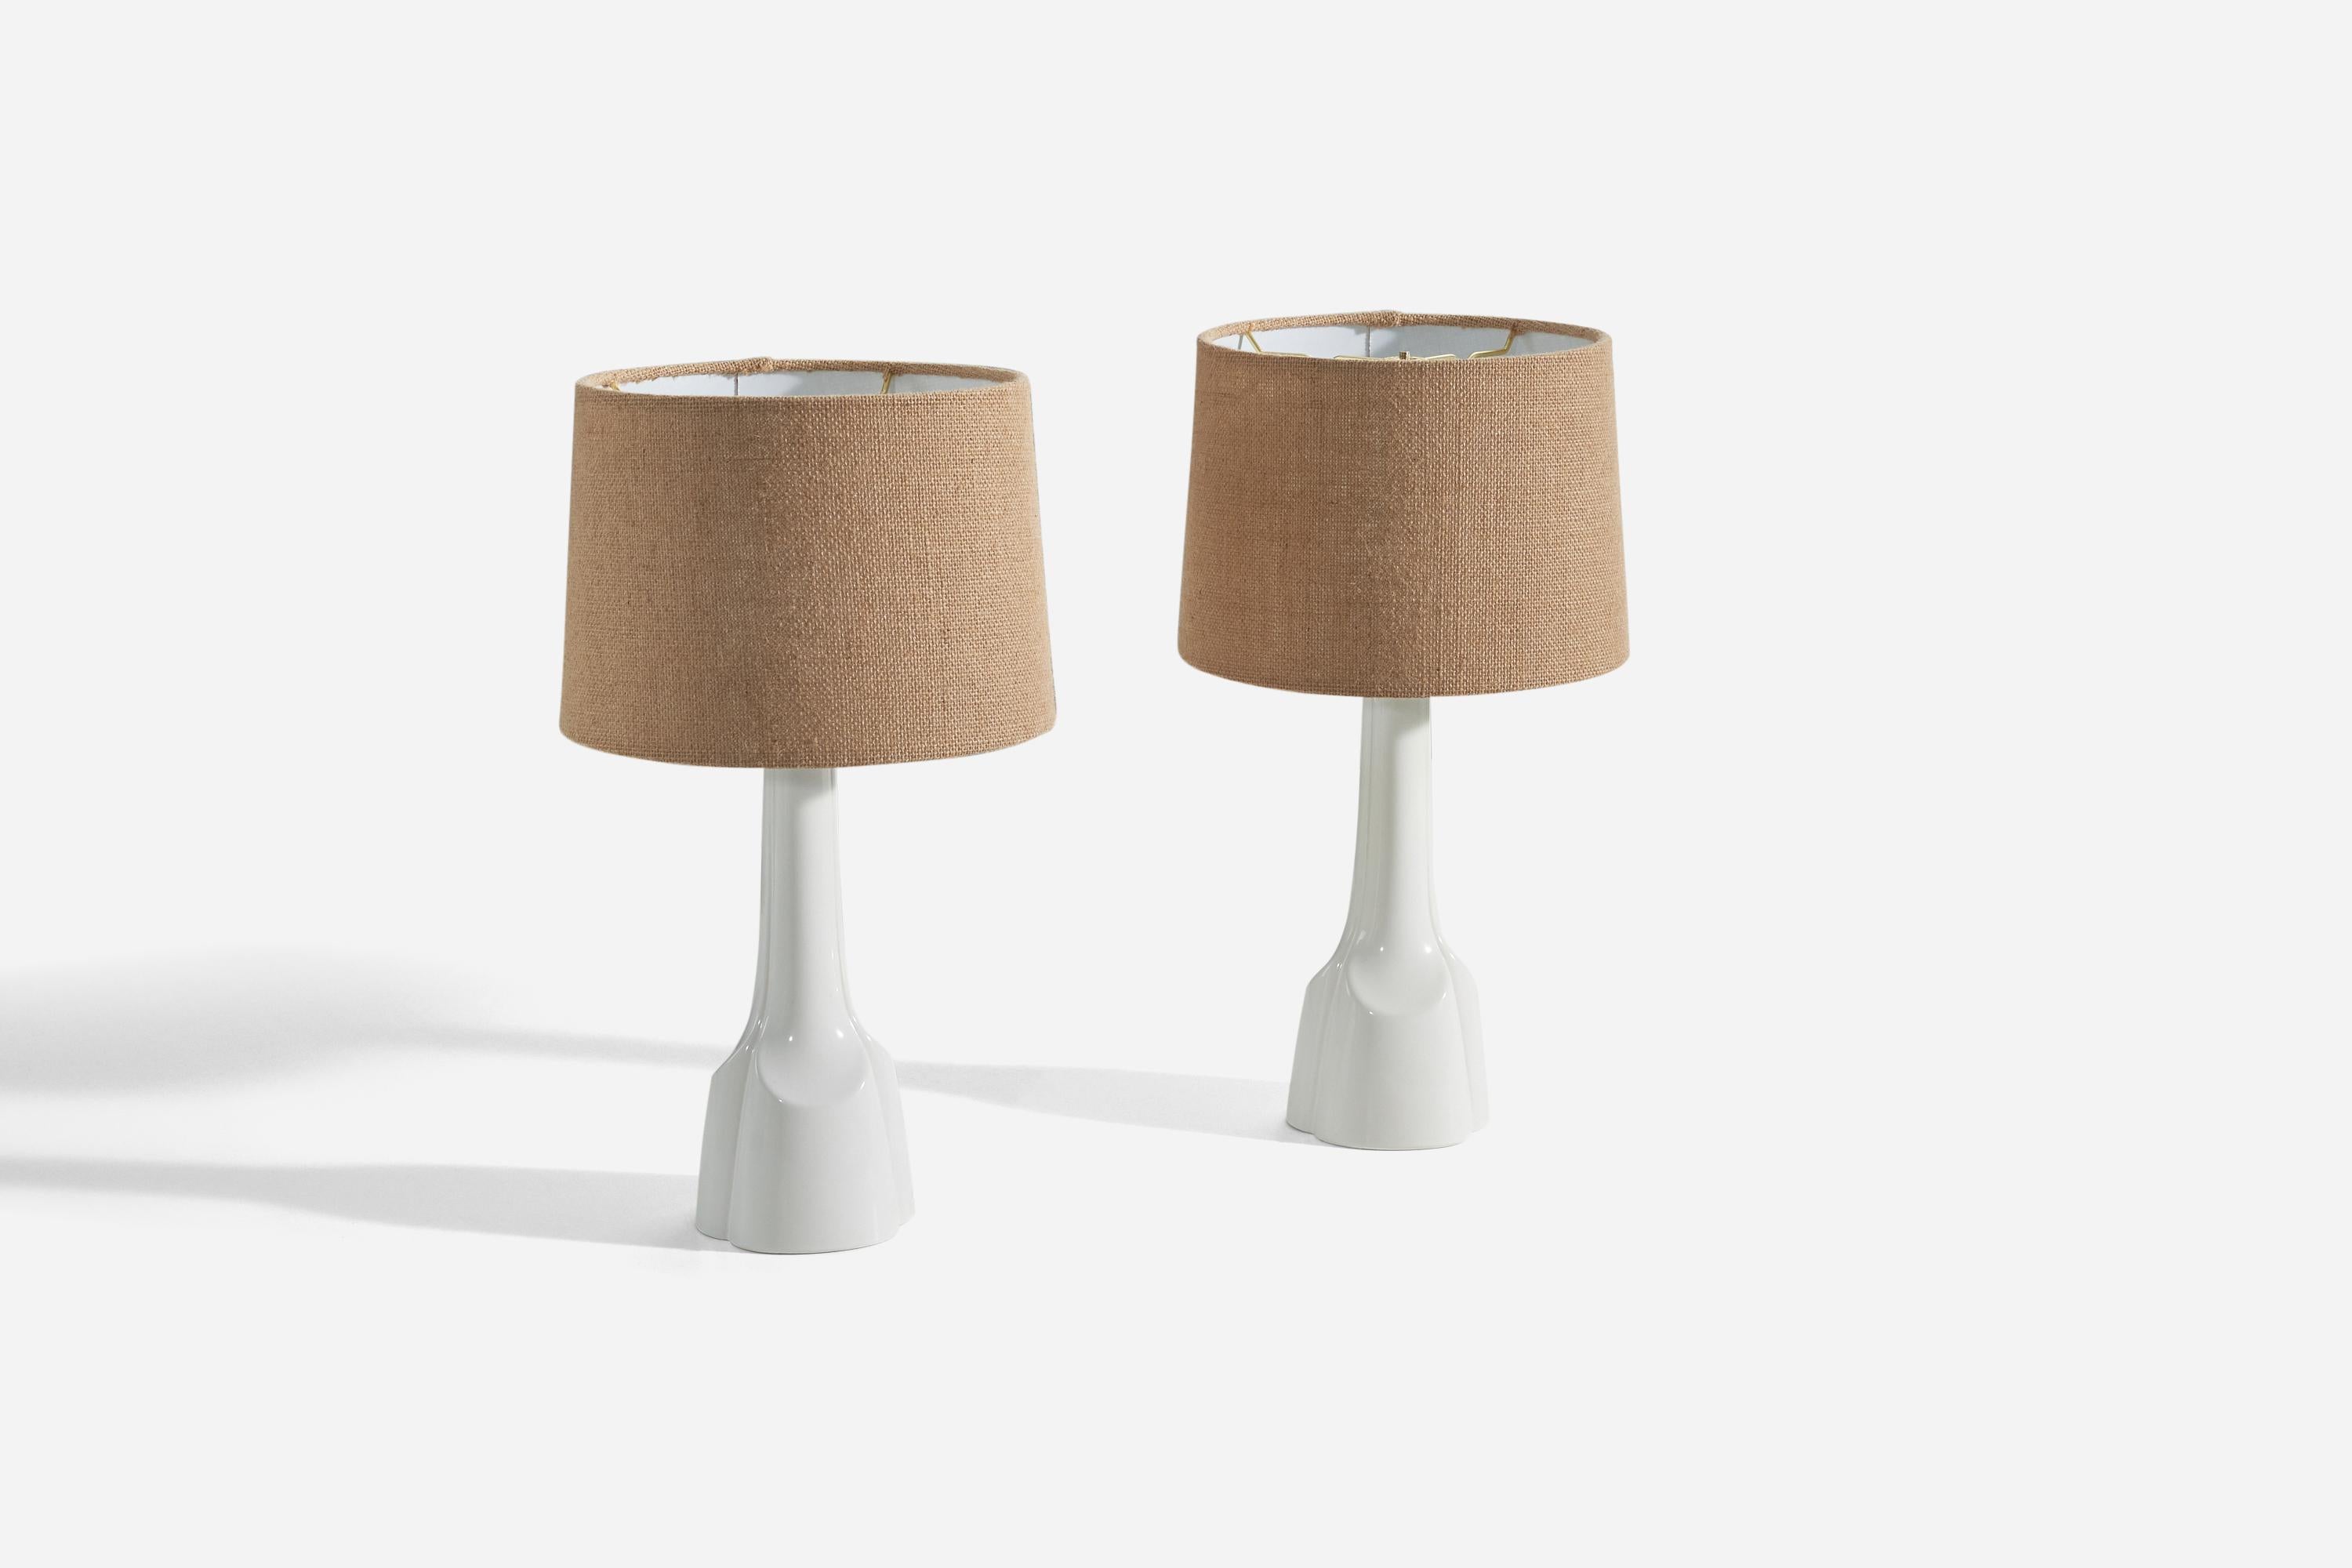 A pair of white, glazed stoneware table lamps designed and produced by Søholm Stentøj, Bornholm, Denmark, 1960s. 

Sold without lampshades. 
Dimensions of Lamp (inches) : (14.06 x 4.5 x 4.5) (H x W x D)
Dimensions of Shade (inches) : (9 x 10 x